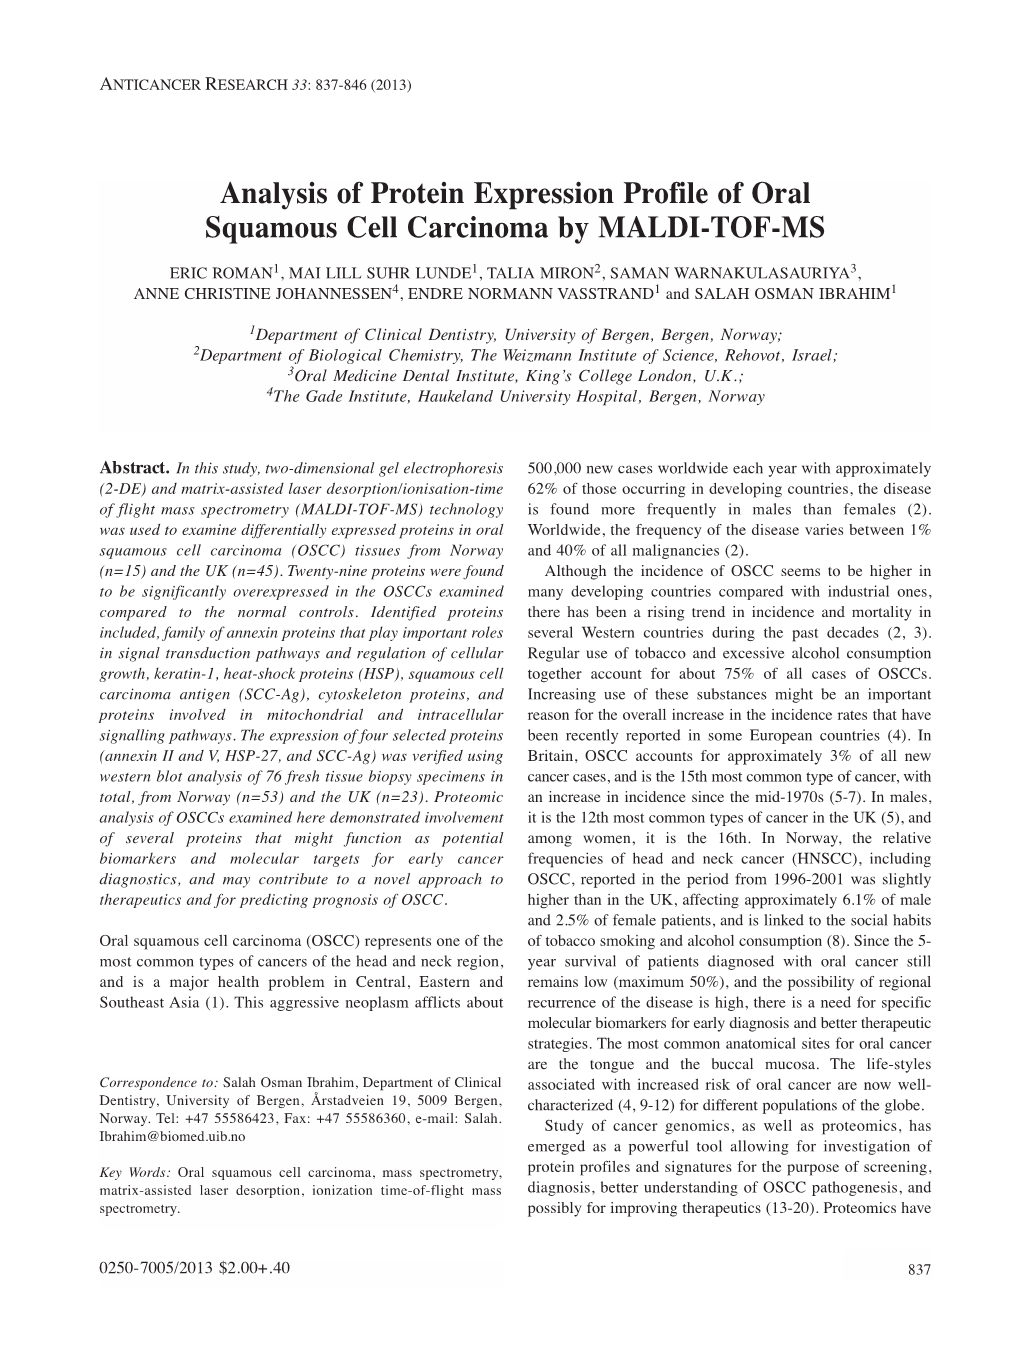 Analysis of Protein Expression Profile of Oral Squamous Cell Carcinoma by MALDI-TOF-MS